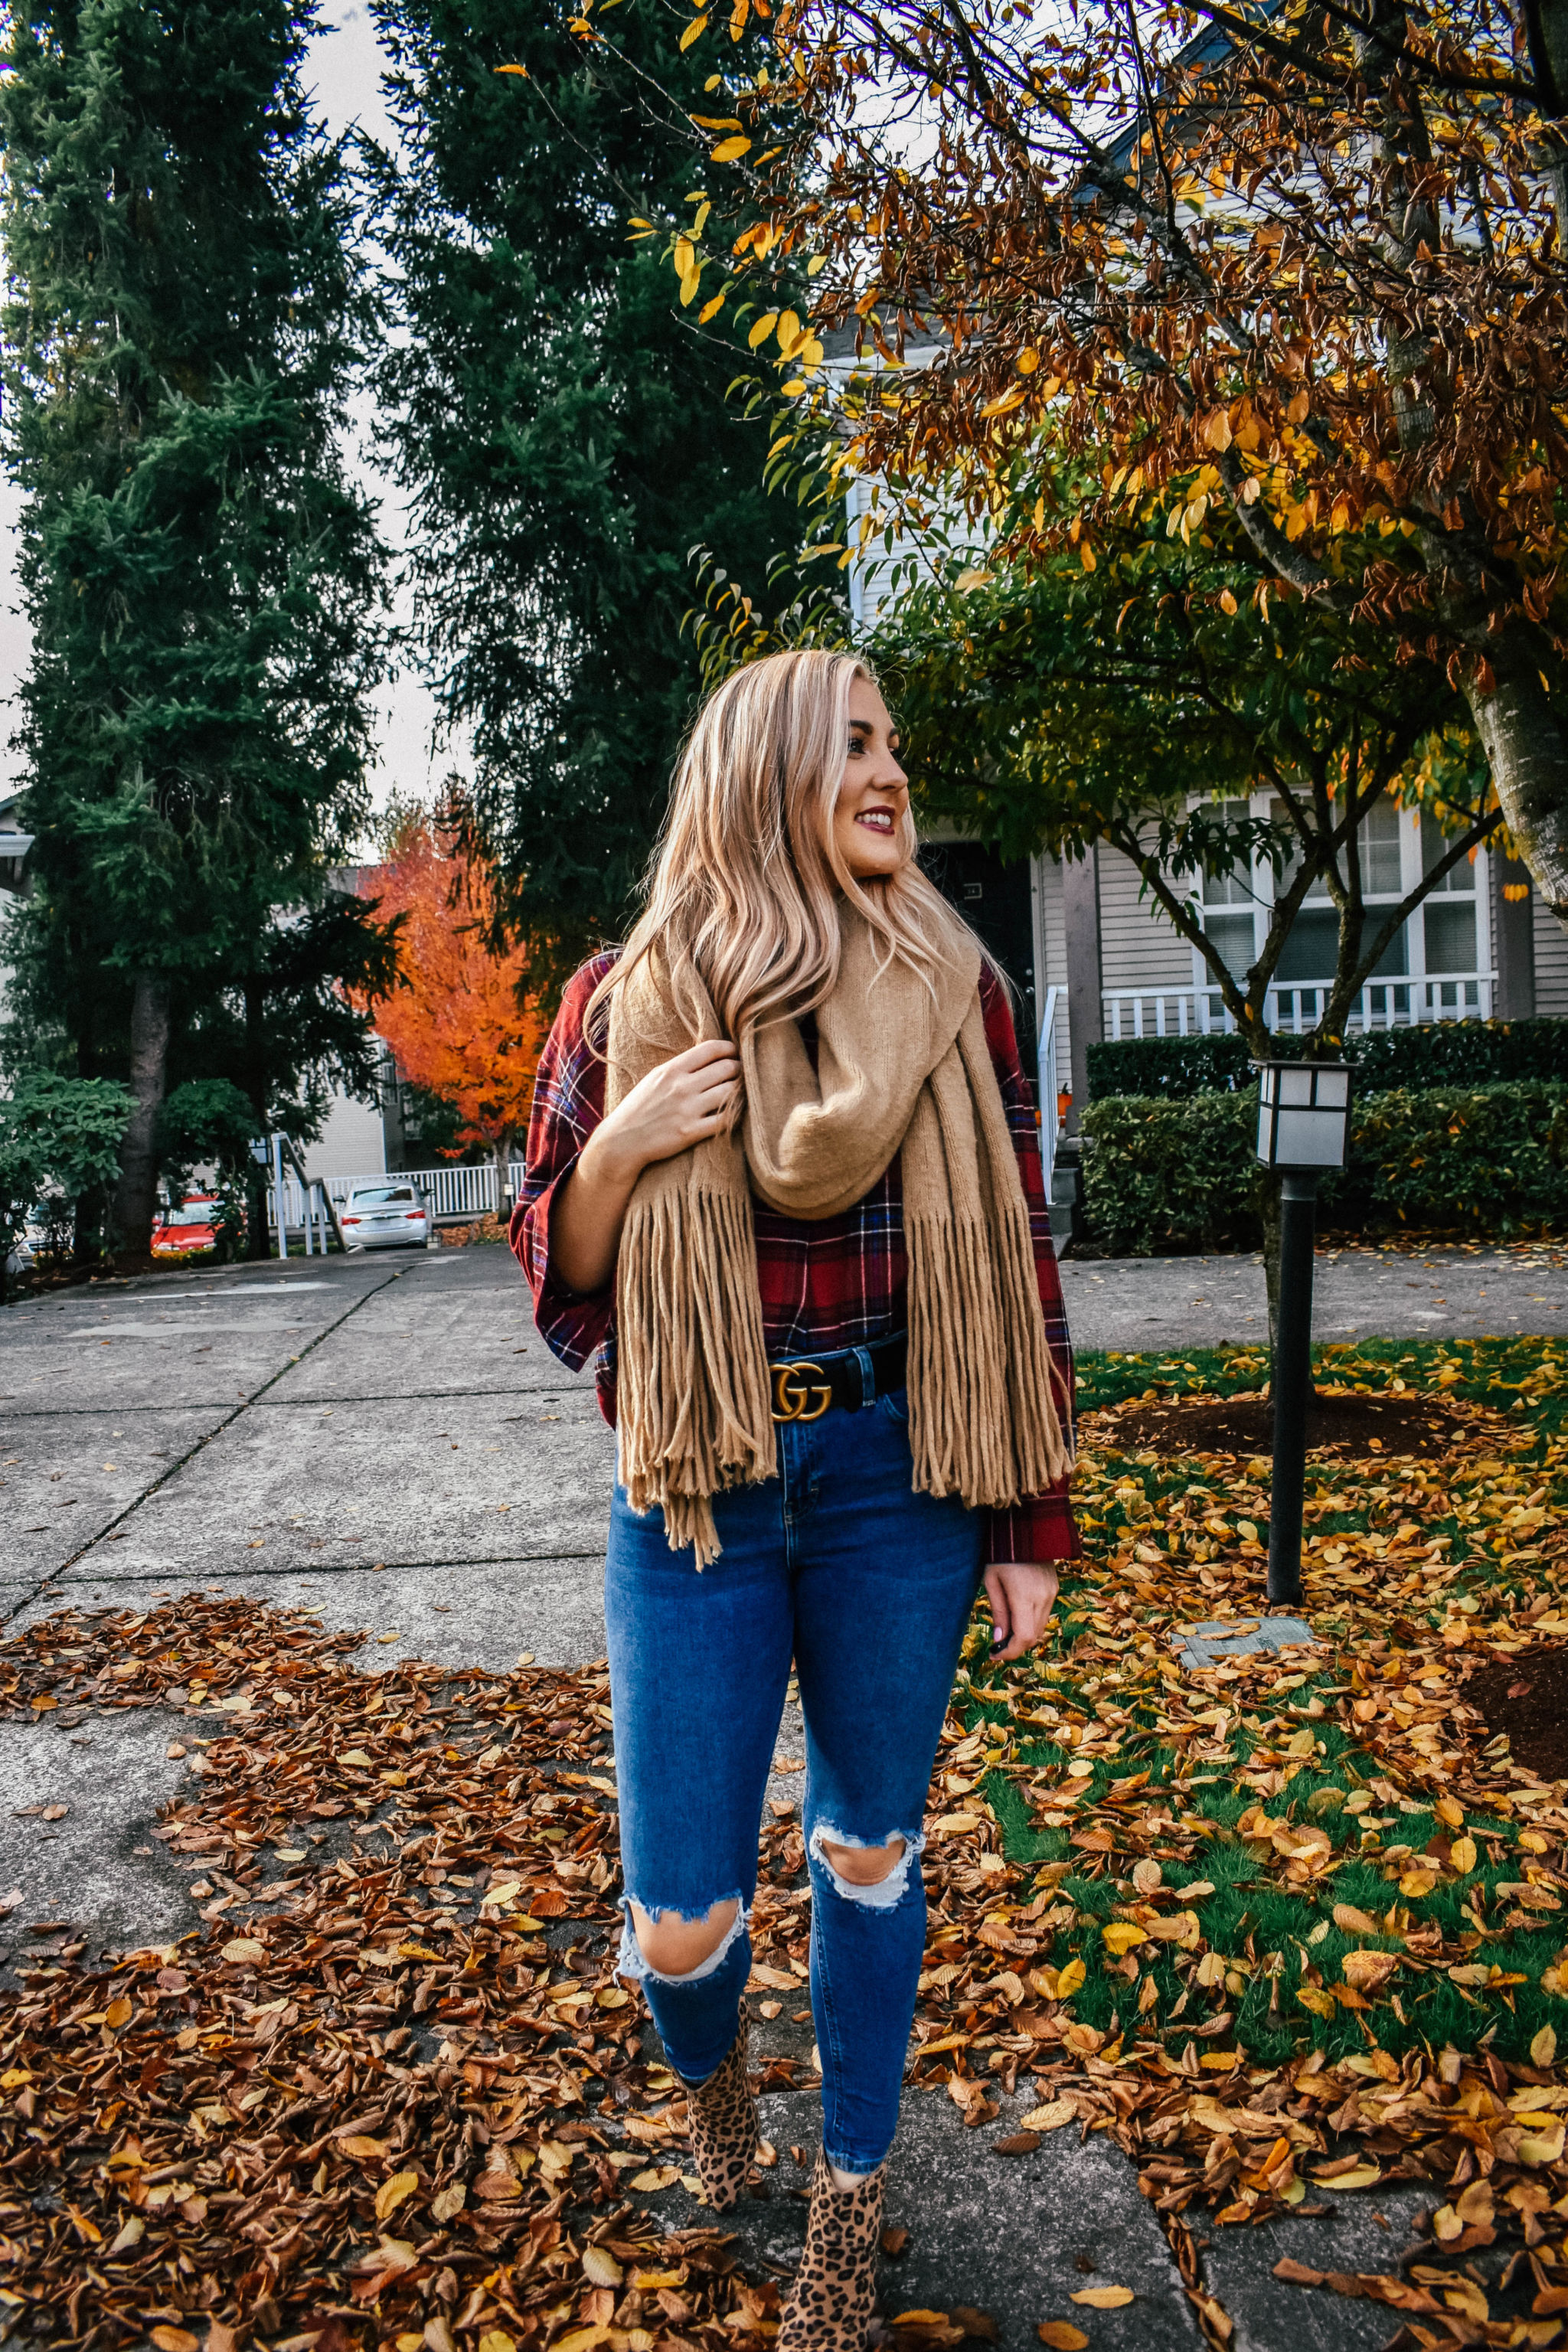 Fall Fashion Inspiration: Cozy Flannels, Leopard Prints, and More!